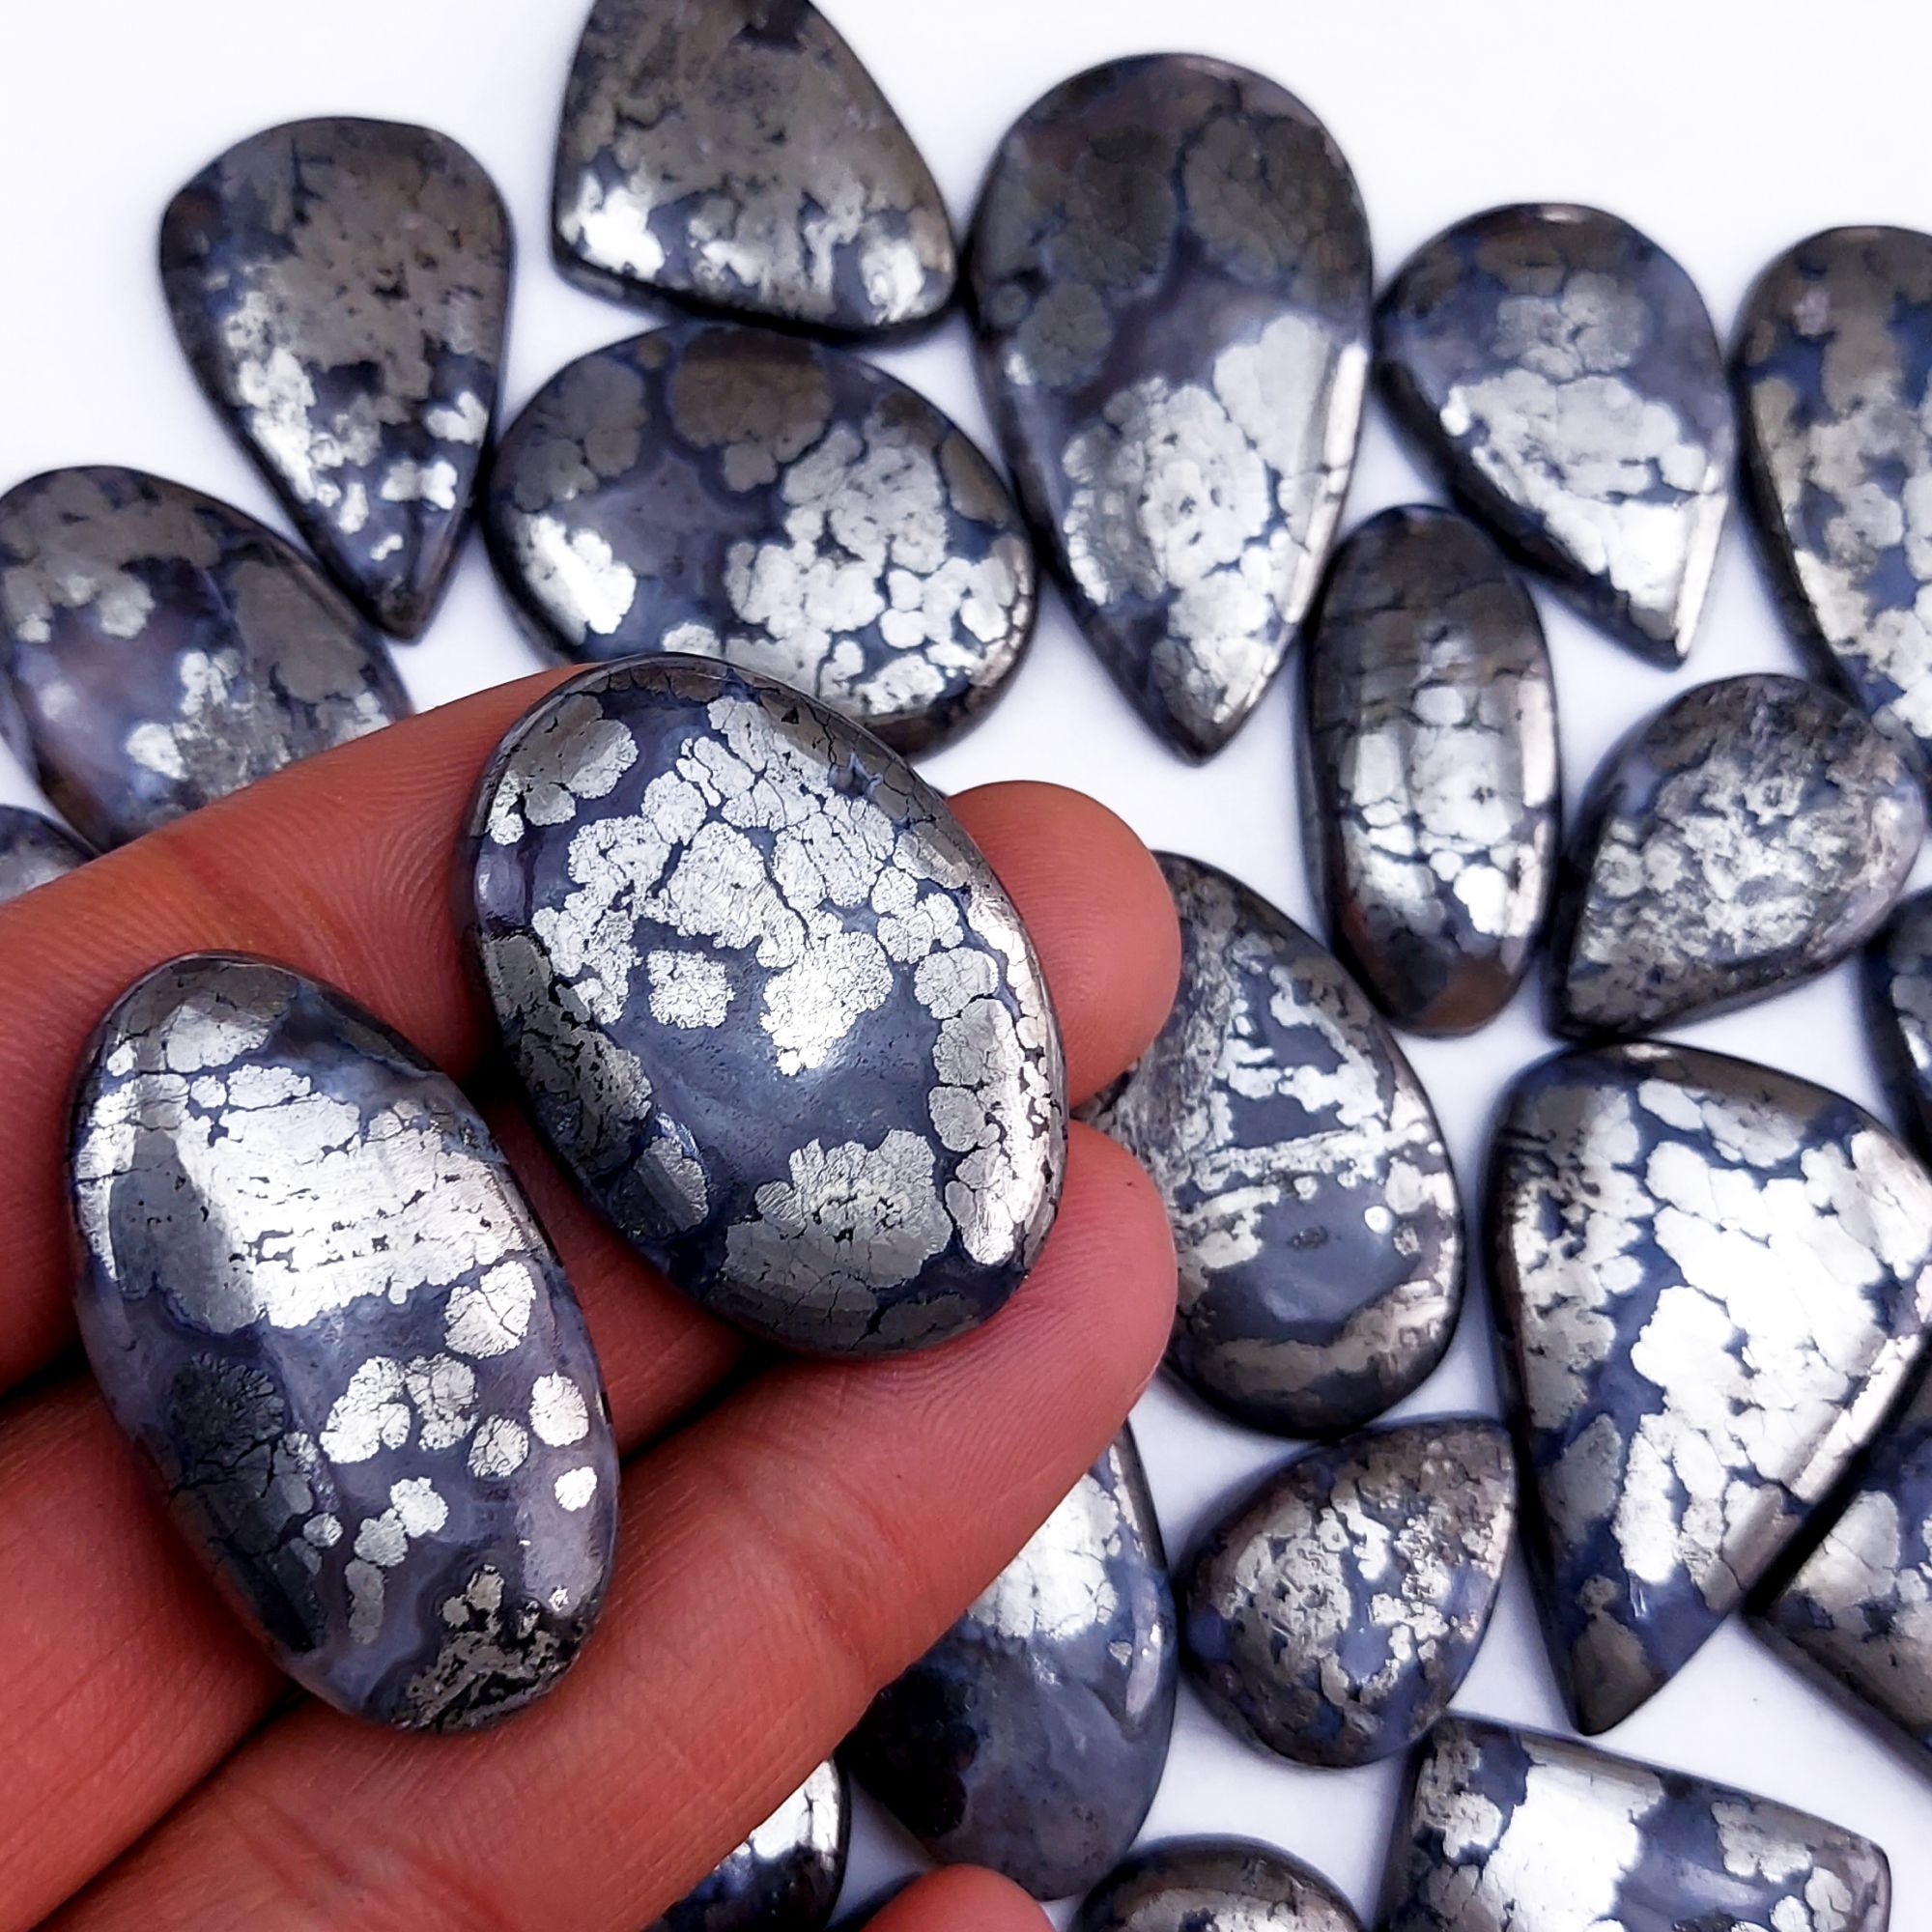 23Pcs 927Cts Natural Marcasite Grey Cabochon Back Side Unpolished Gemstone Semi-Precious Gemstones For Jewelry Making 44x24 20x16mm #10040